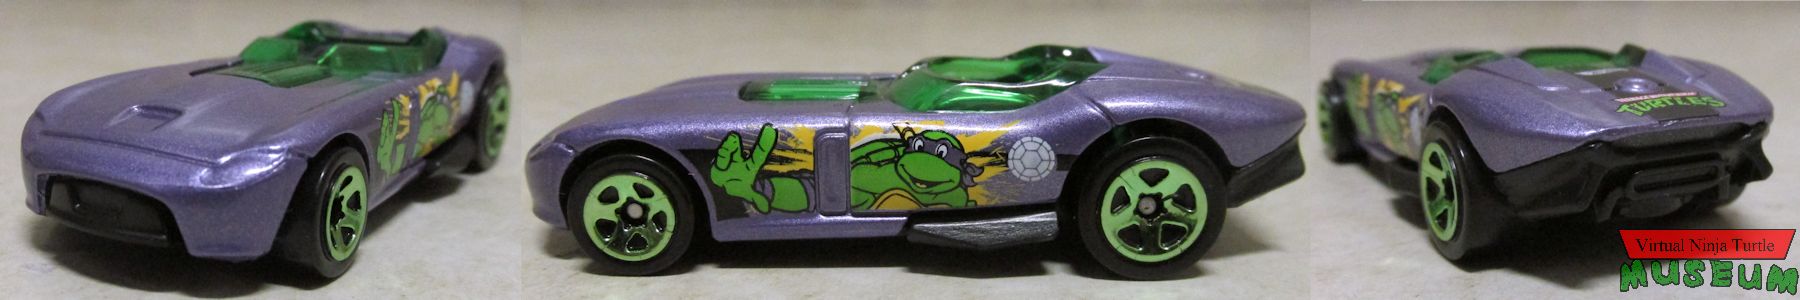 Donatello RRRoadster front, side and back